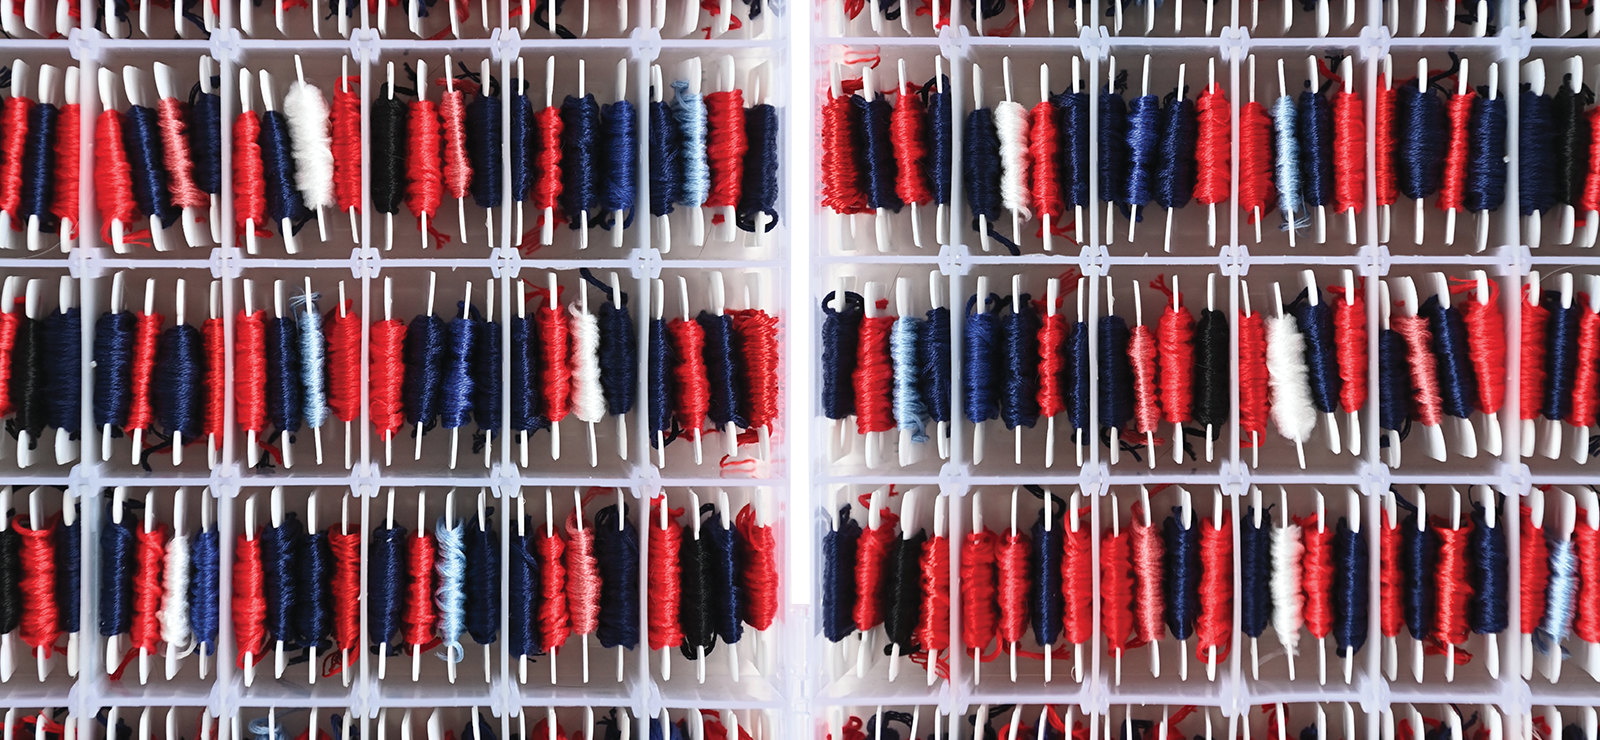 spools of red and blue thread